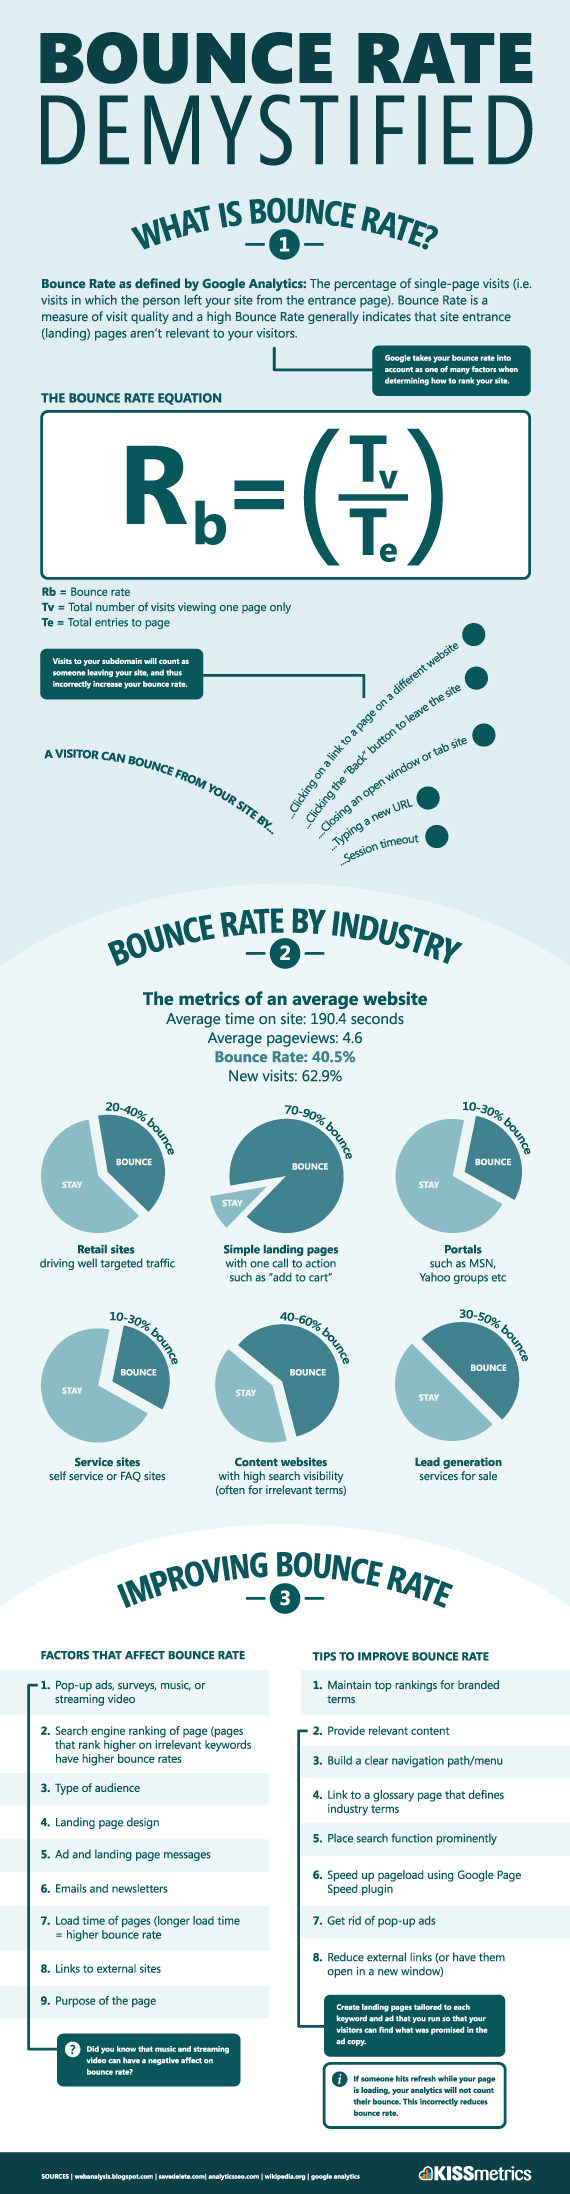 Bounce Rate Demystified